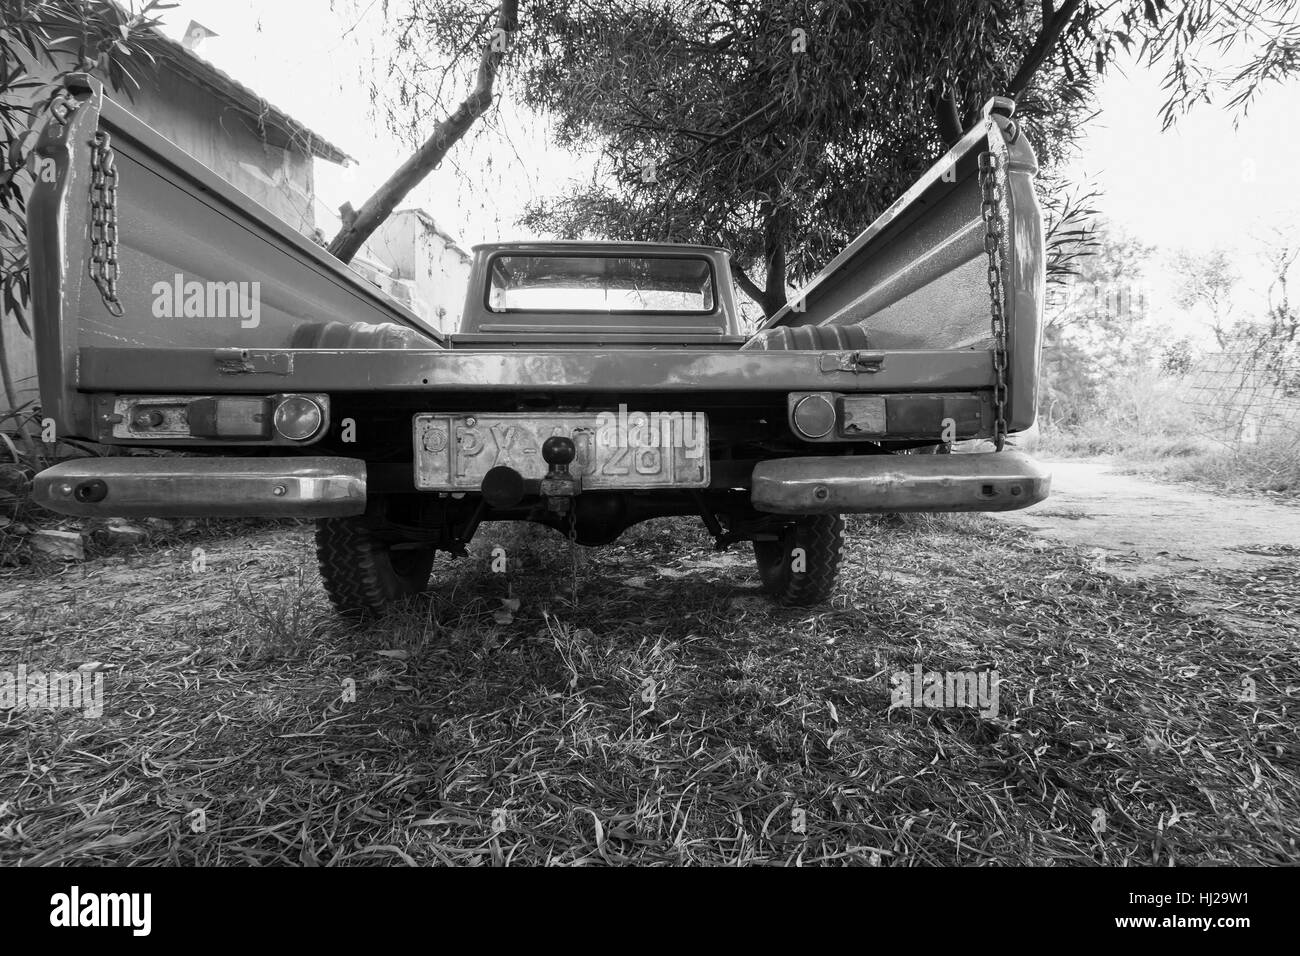 Zakynthos, Greece - August 16, 2016: Rear view of old Datsun 1300 pickup car, black and white photo Stock Photo